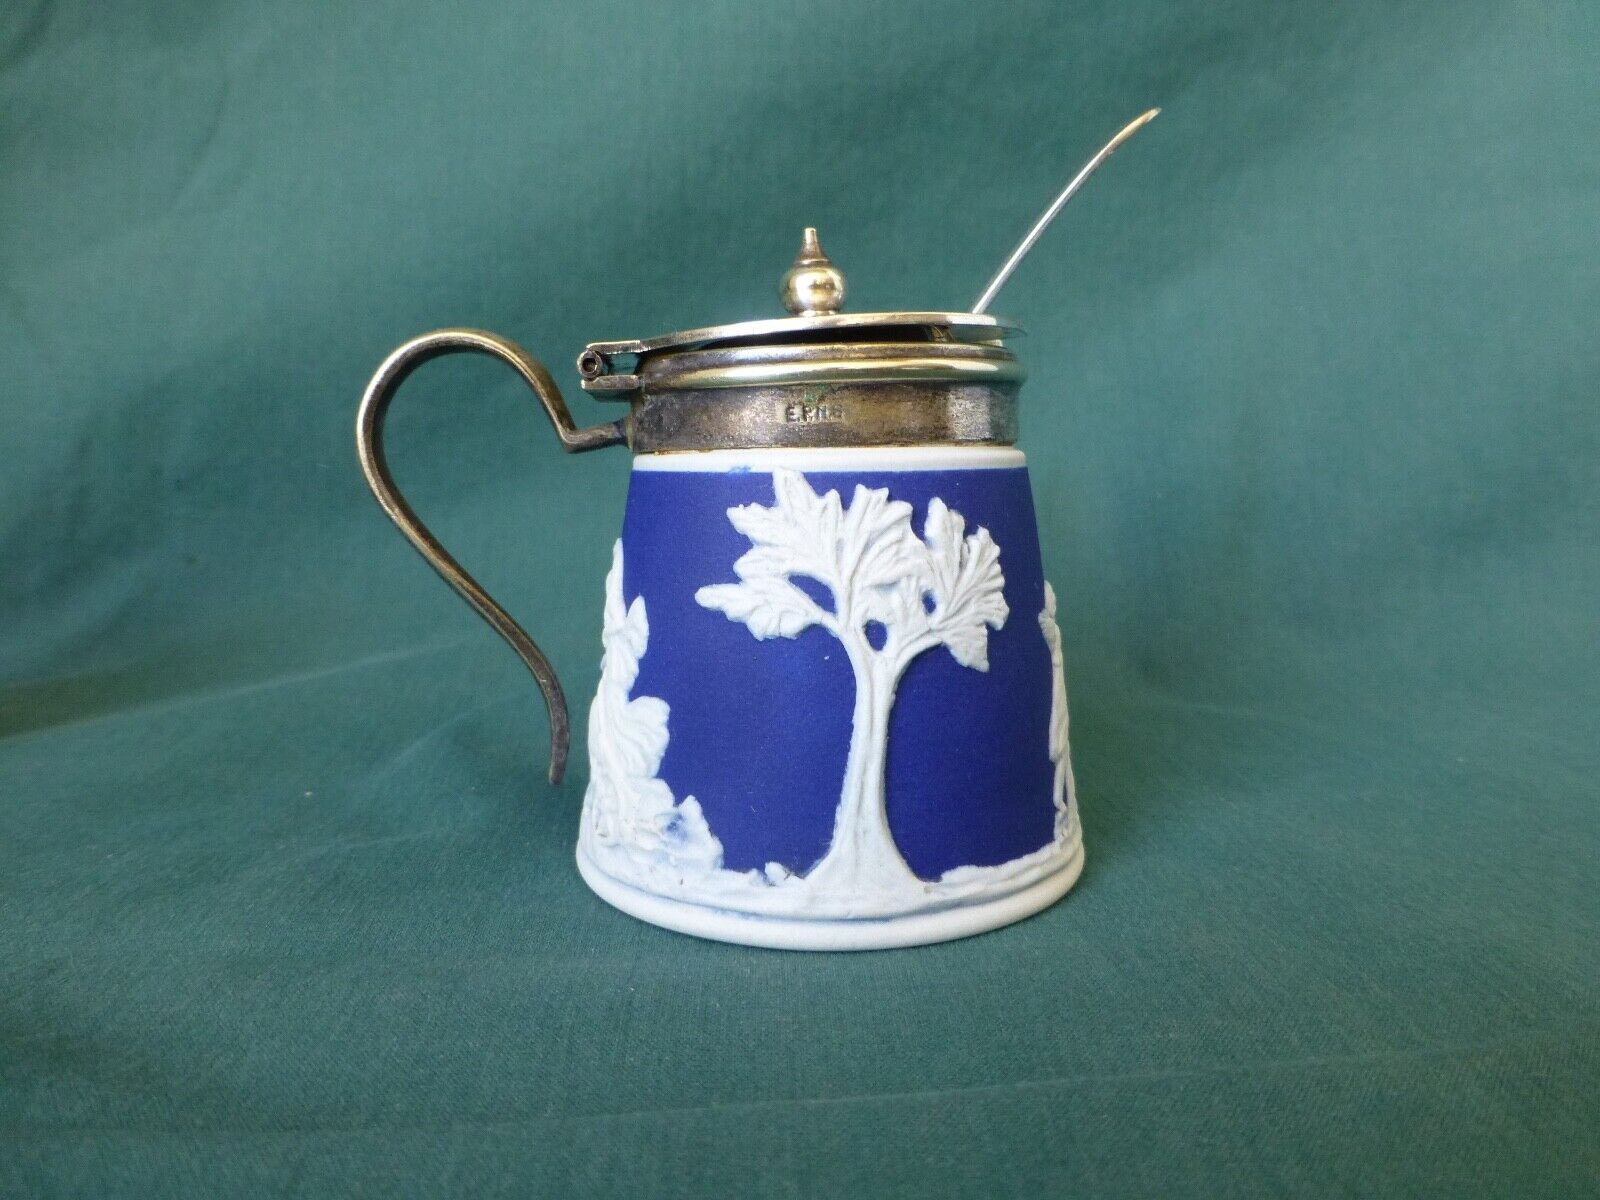 Vintage  Wedgwood Mustard Jar or Condiment Jar with Silver Plated Cover & Spoon